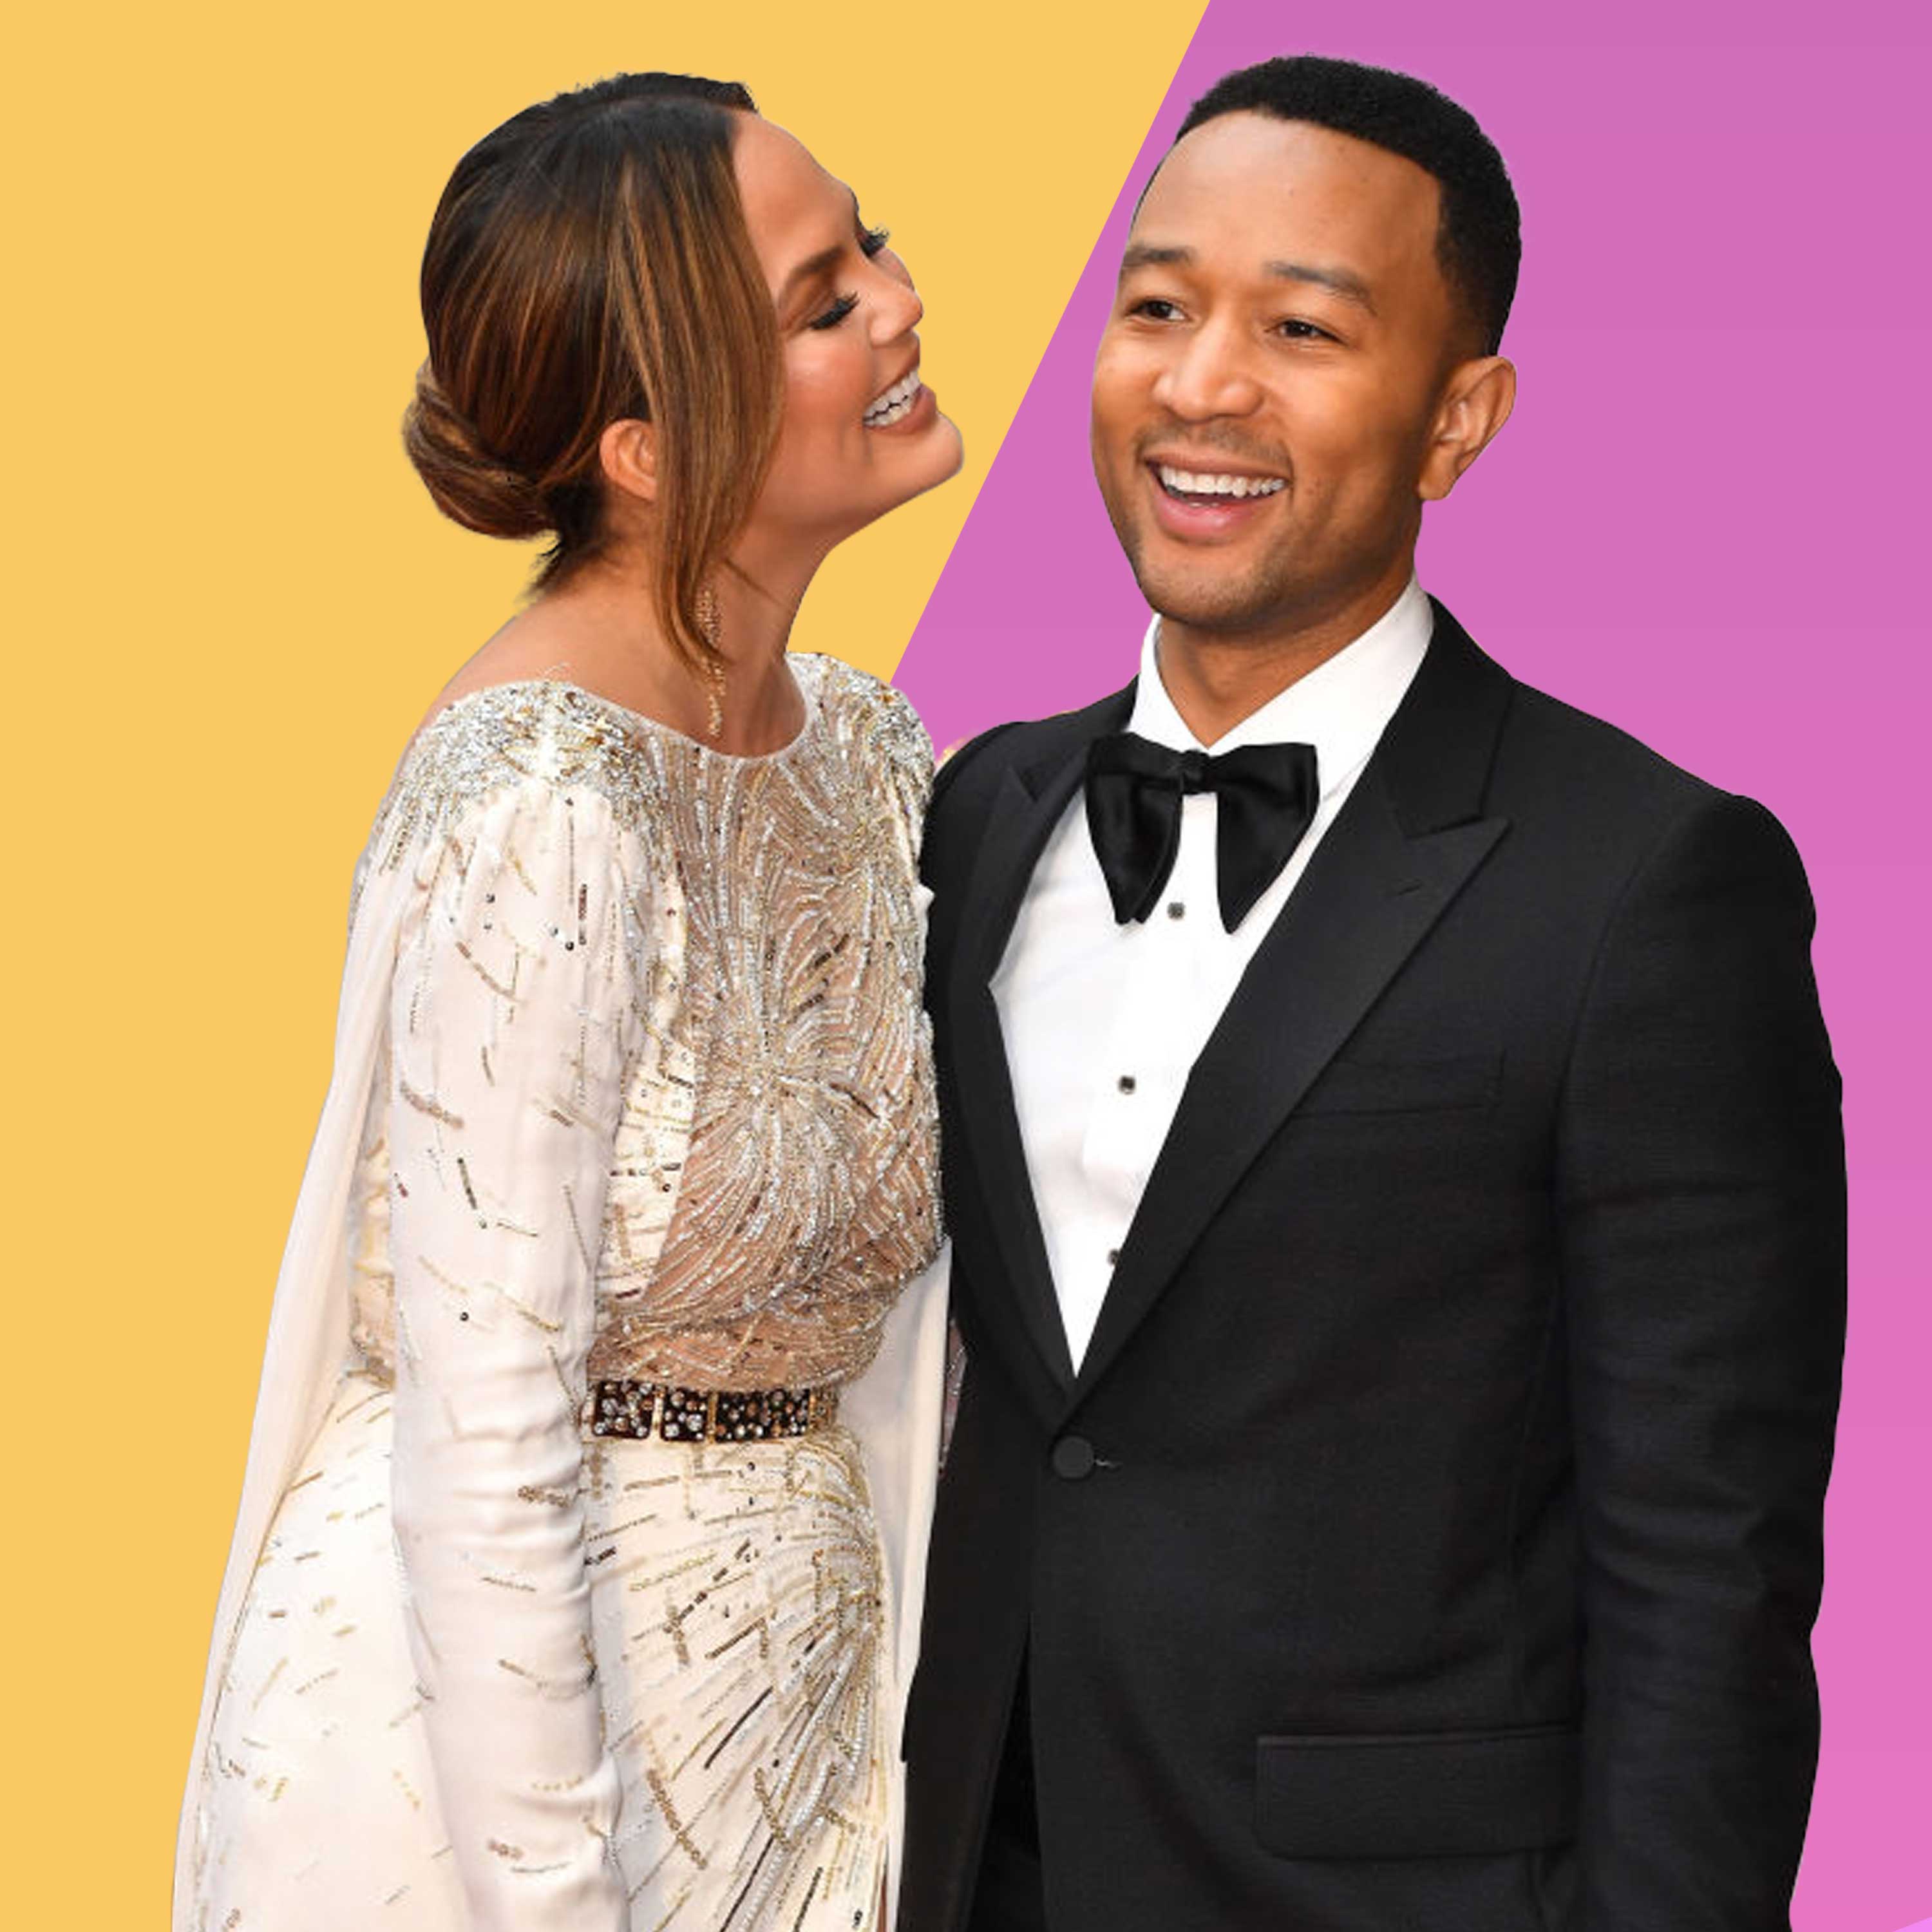 When A Reporter Implied That John Legend's Wife Chrissy Teigen Was Irrelevant, This Happened...